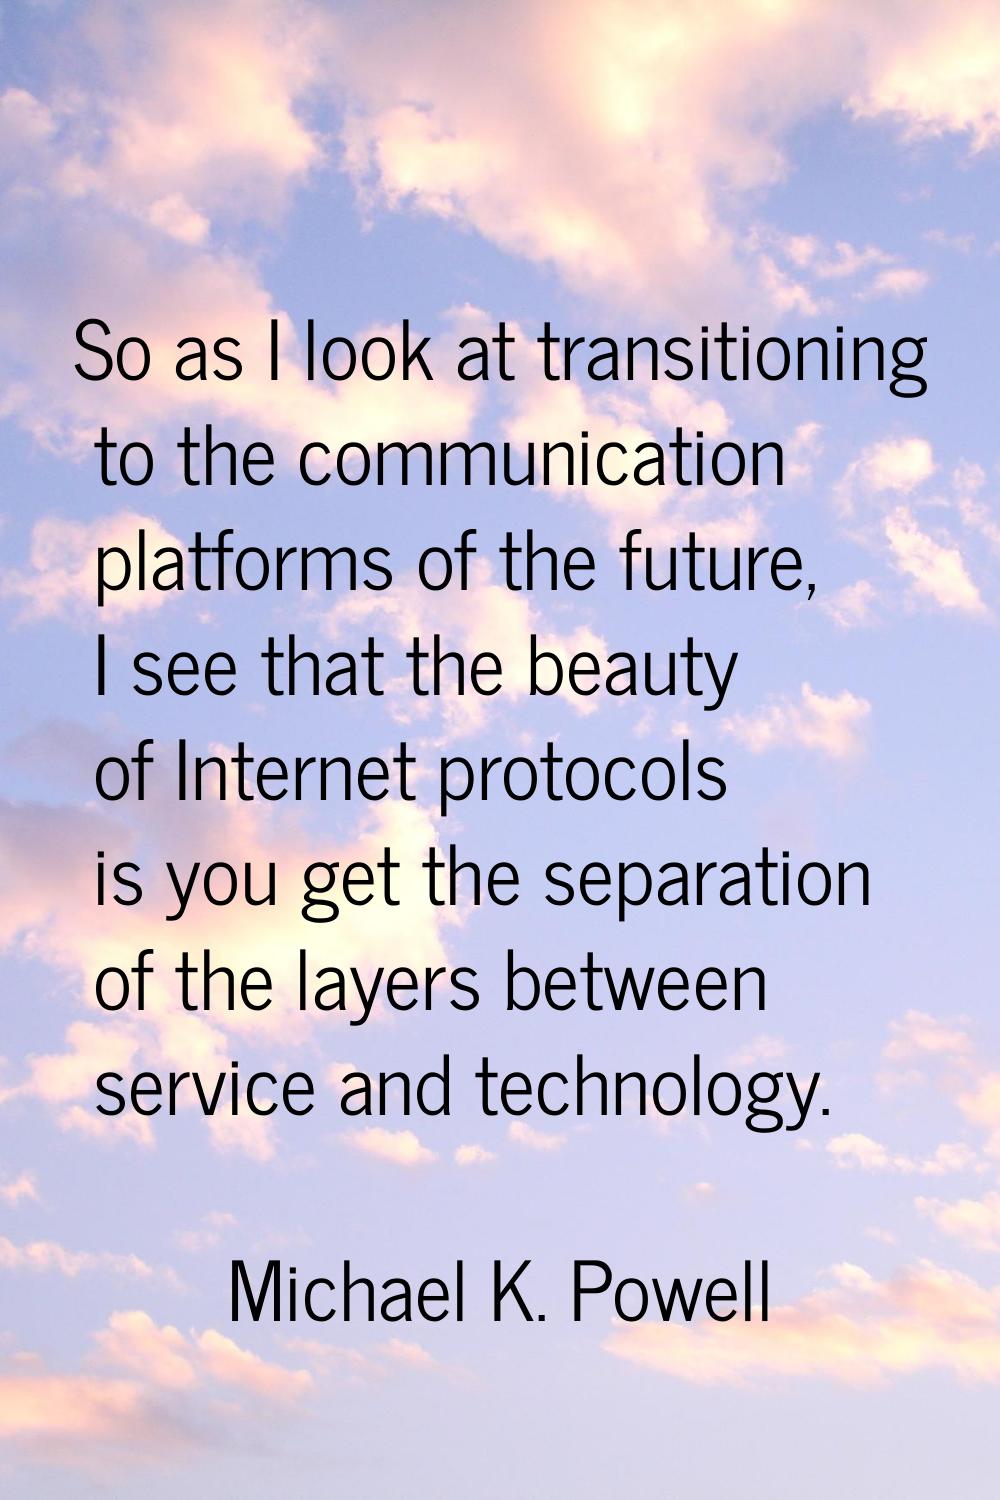 So as I look at transitioning to the communication platforms of the future, I see that the beauty o